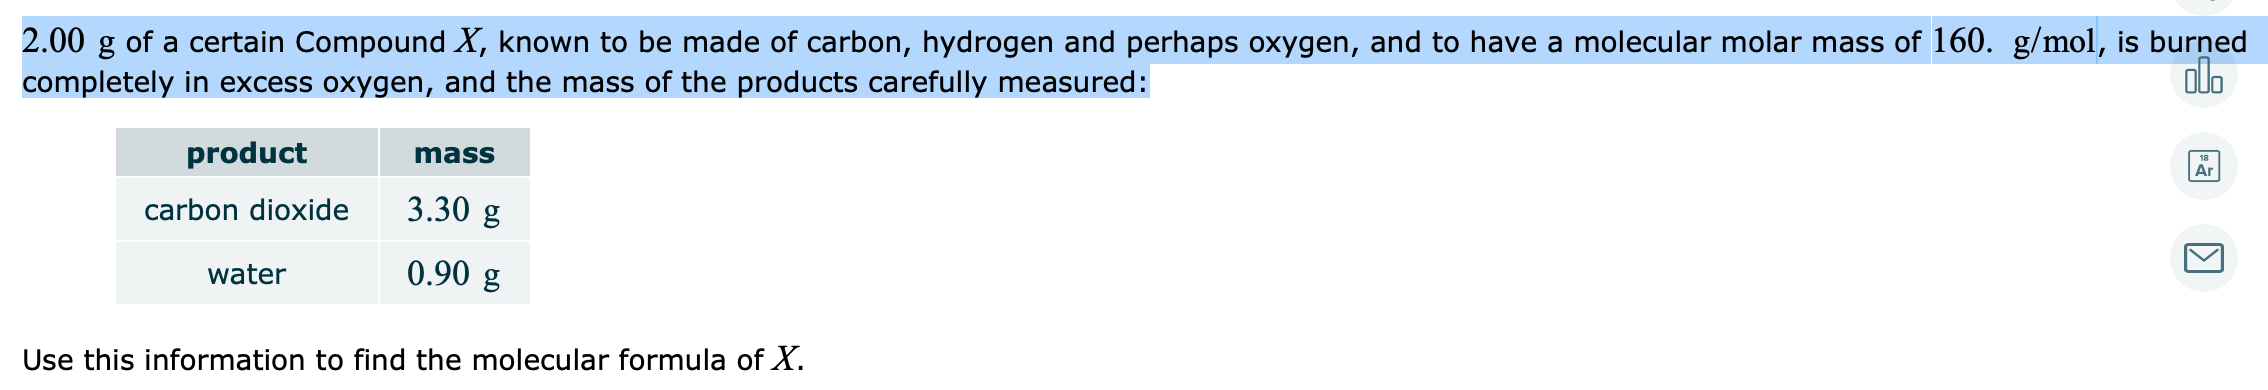 2.00 g of a certain Compound X, known to be made of carbon, hydrogen and perhaps oxygen, and to have a molecular molar mass of 160. g/mol, is burned
olo
completely in excess oxygen, and the mass of the products carefully measured:
product
mass
18
Ar
carbon dioxide
3.30 g
water
0.90 g
Use this information to find the molecular formula of X.
